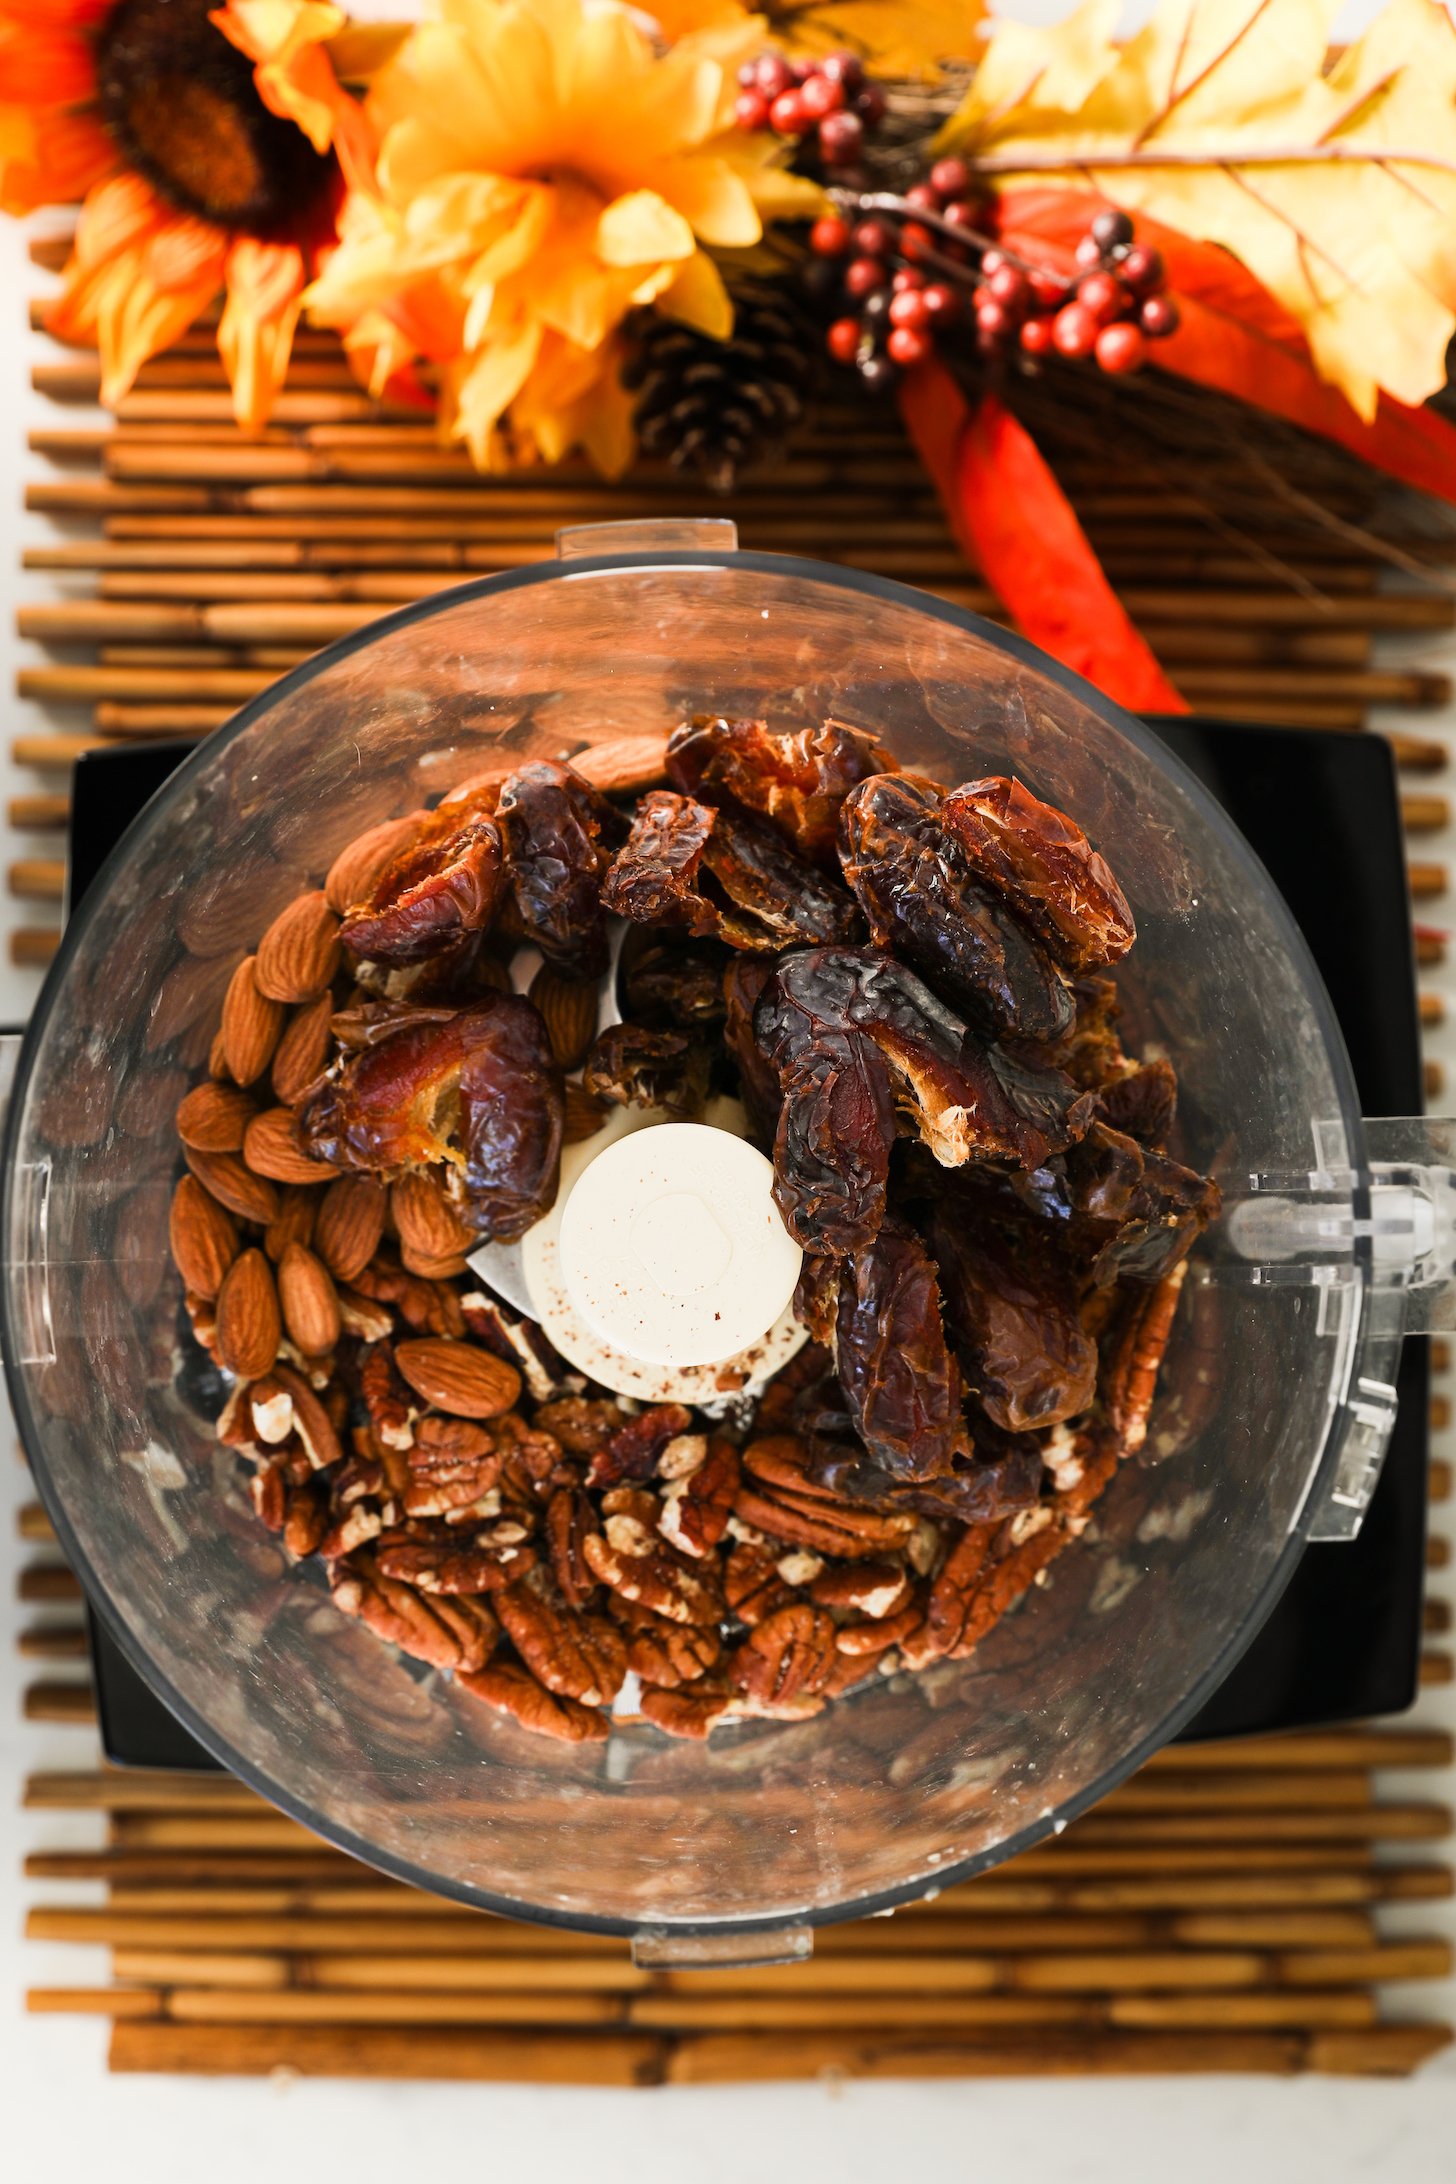 Top view of a food processor filled with dates, almonds and pecans, with seasonal flowers positioned nearby.